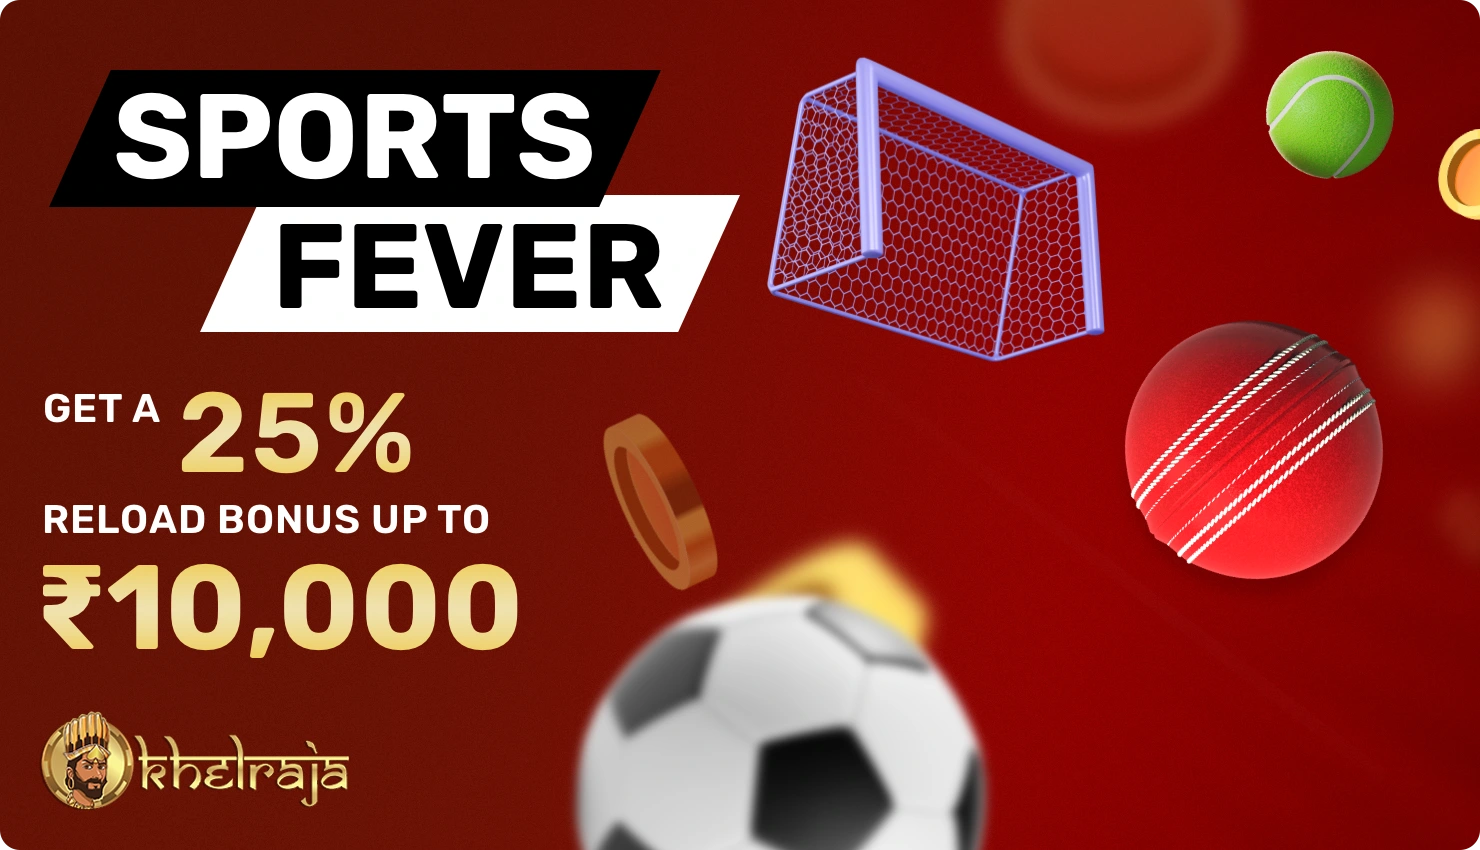 Sports Fever is a special reload bonus for Khelraja users who bet on sports